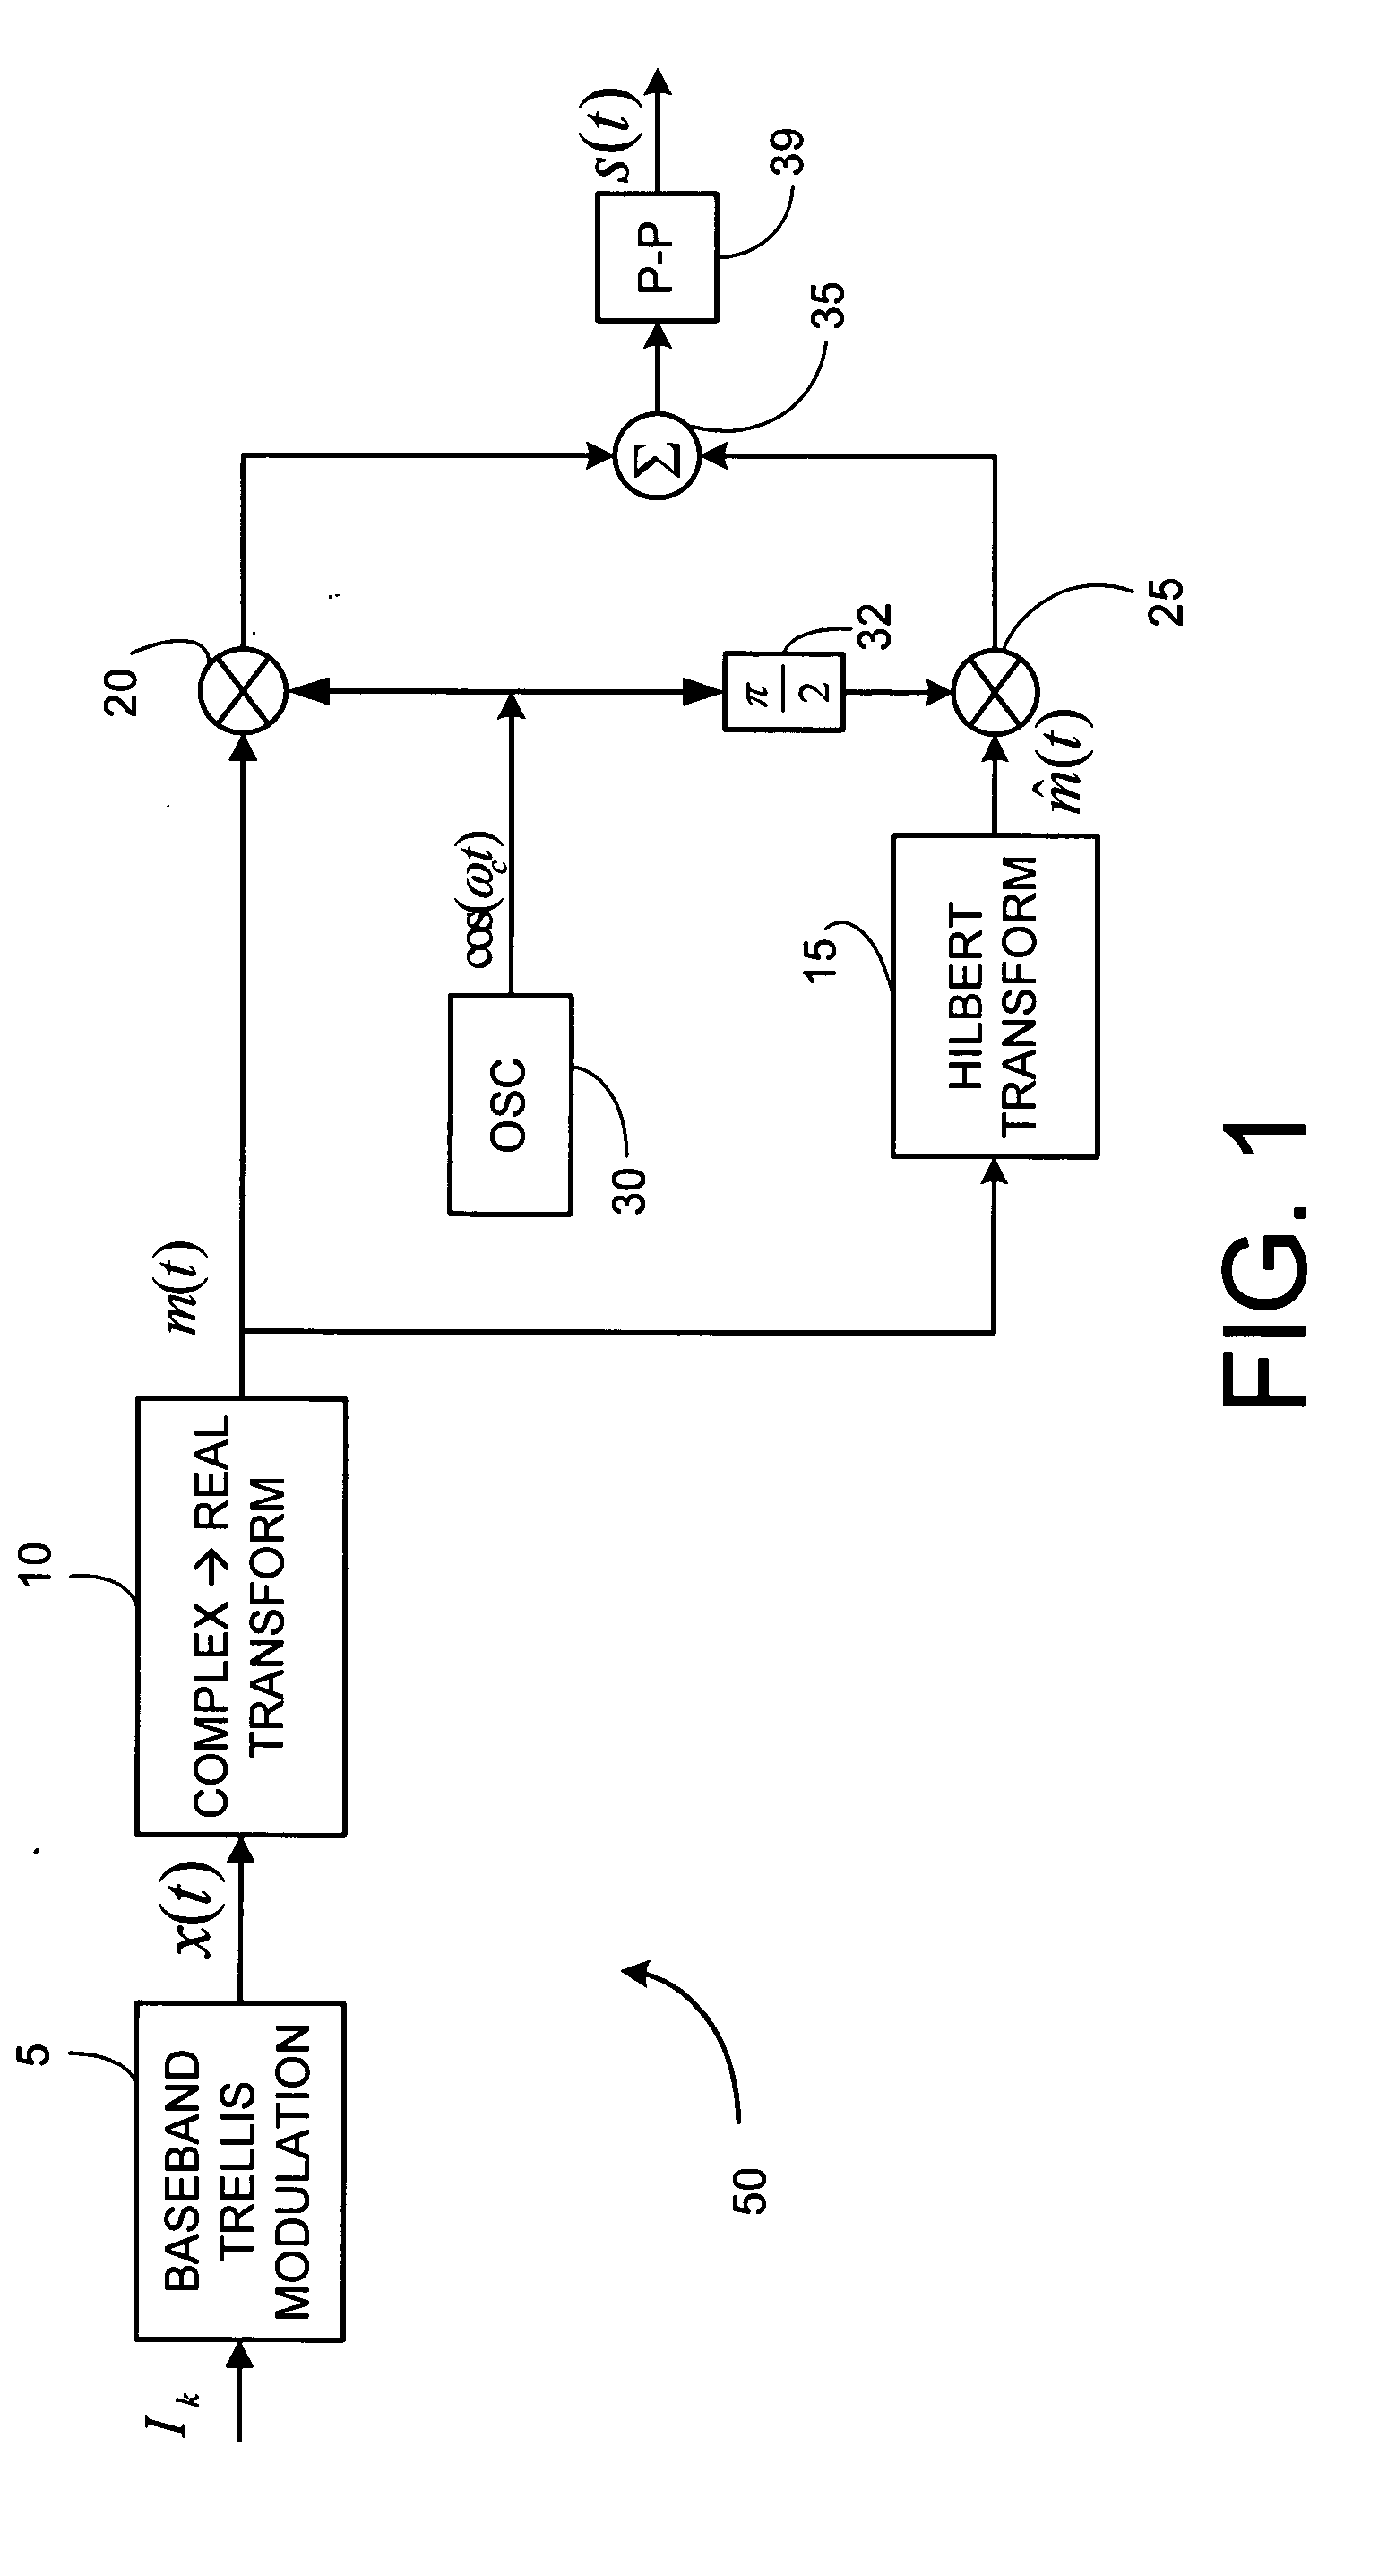 Single sideband and quadrature multiplexed continuous phase modulation